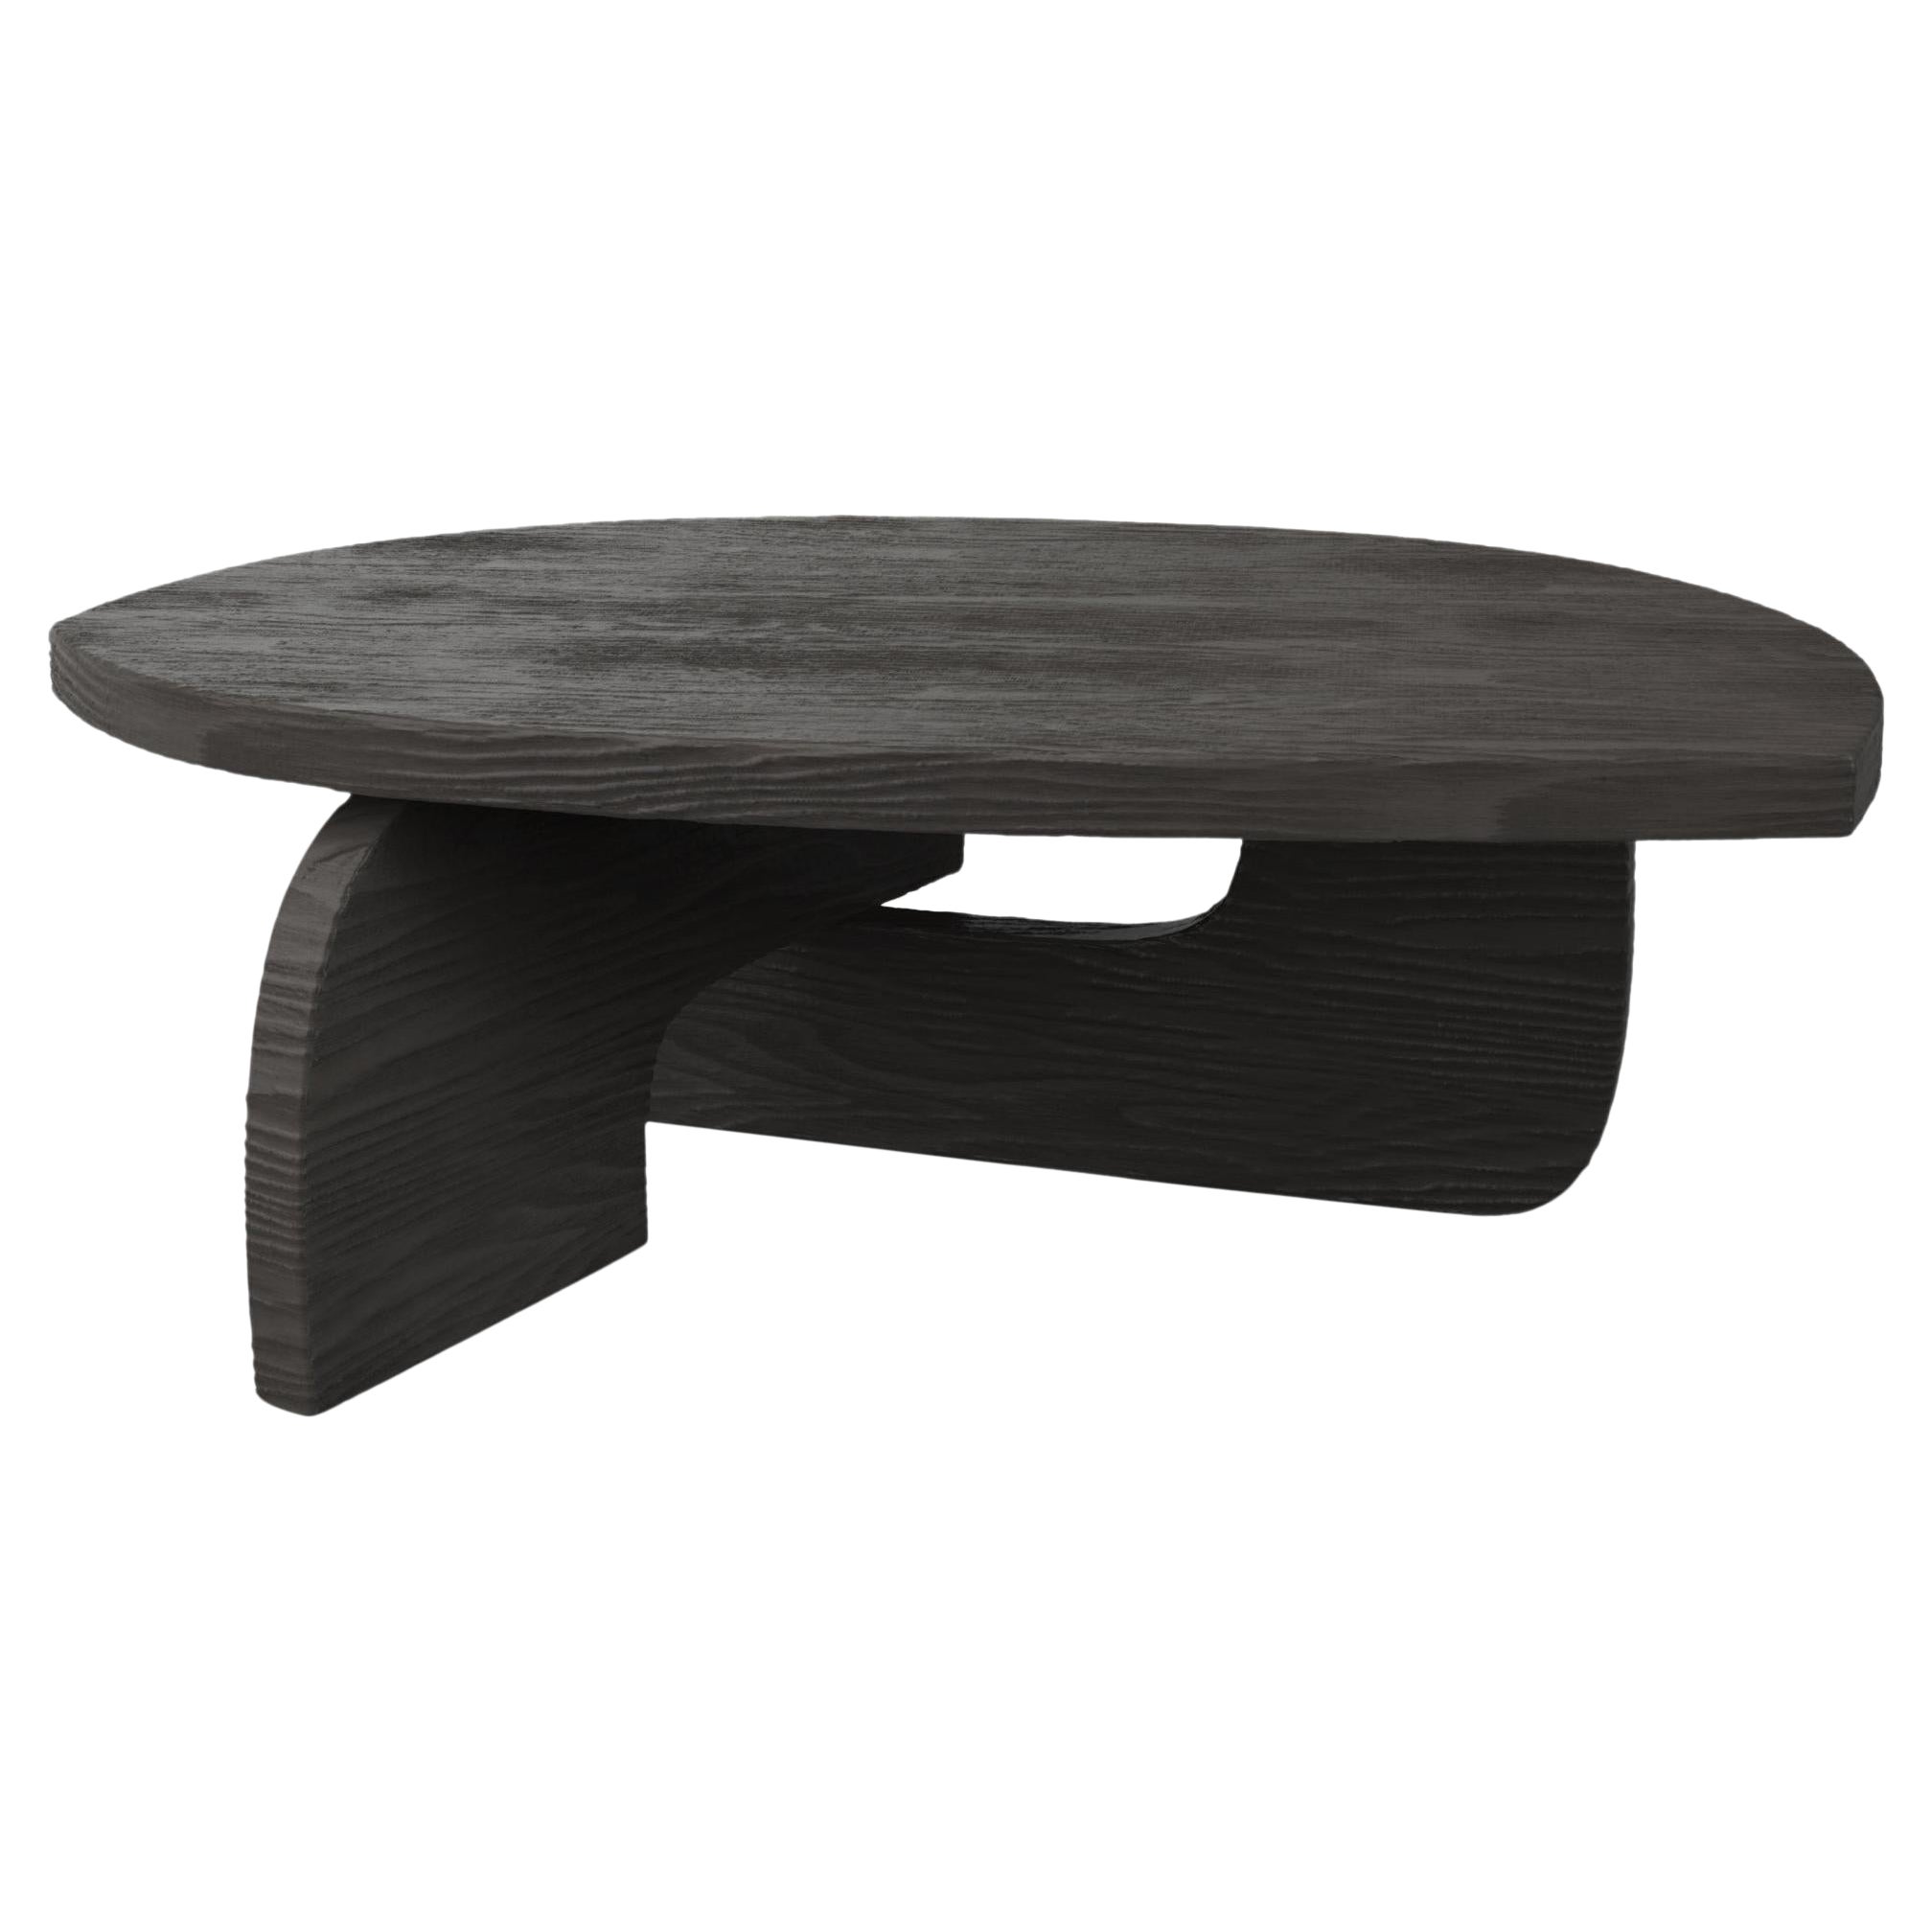 Reef V3 Low Table by Edizione Limitata For Sale